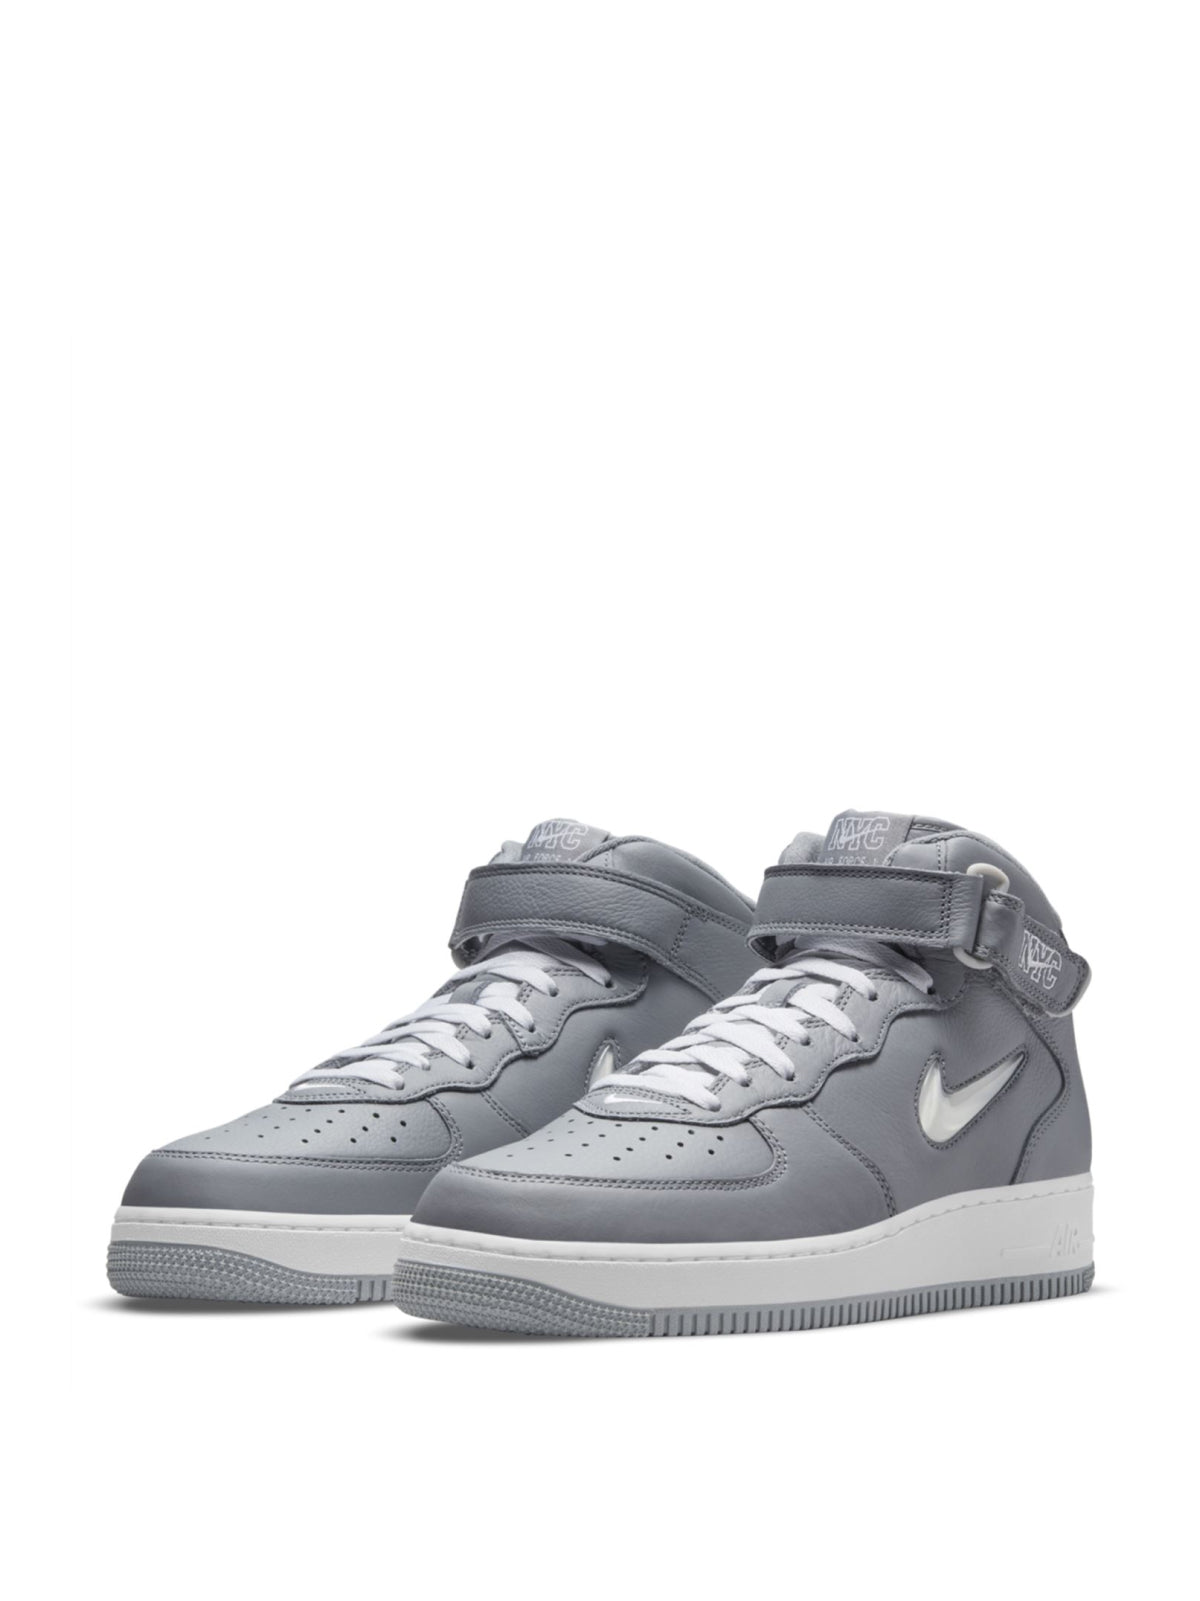 Nike-OUTLET-SALE-Air Force 1 Mid QS Jewel NYC Sneakers-ARCHIVIST